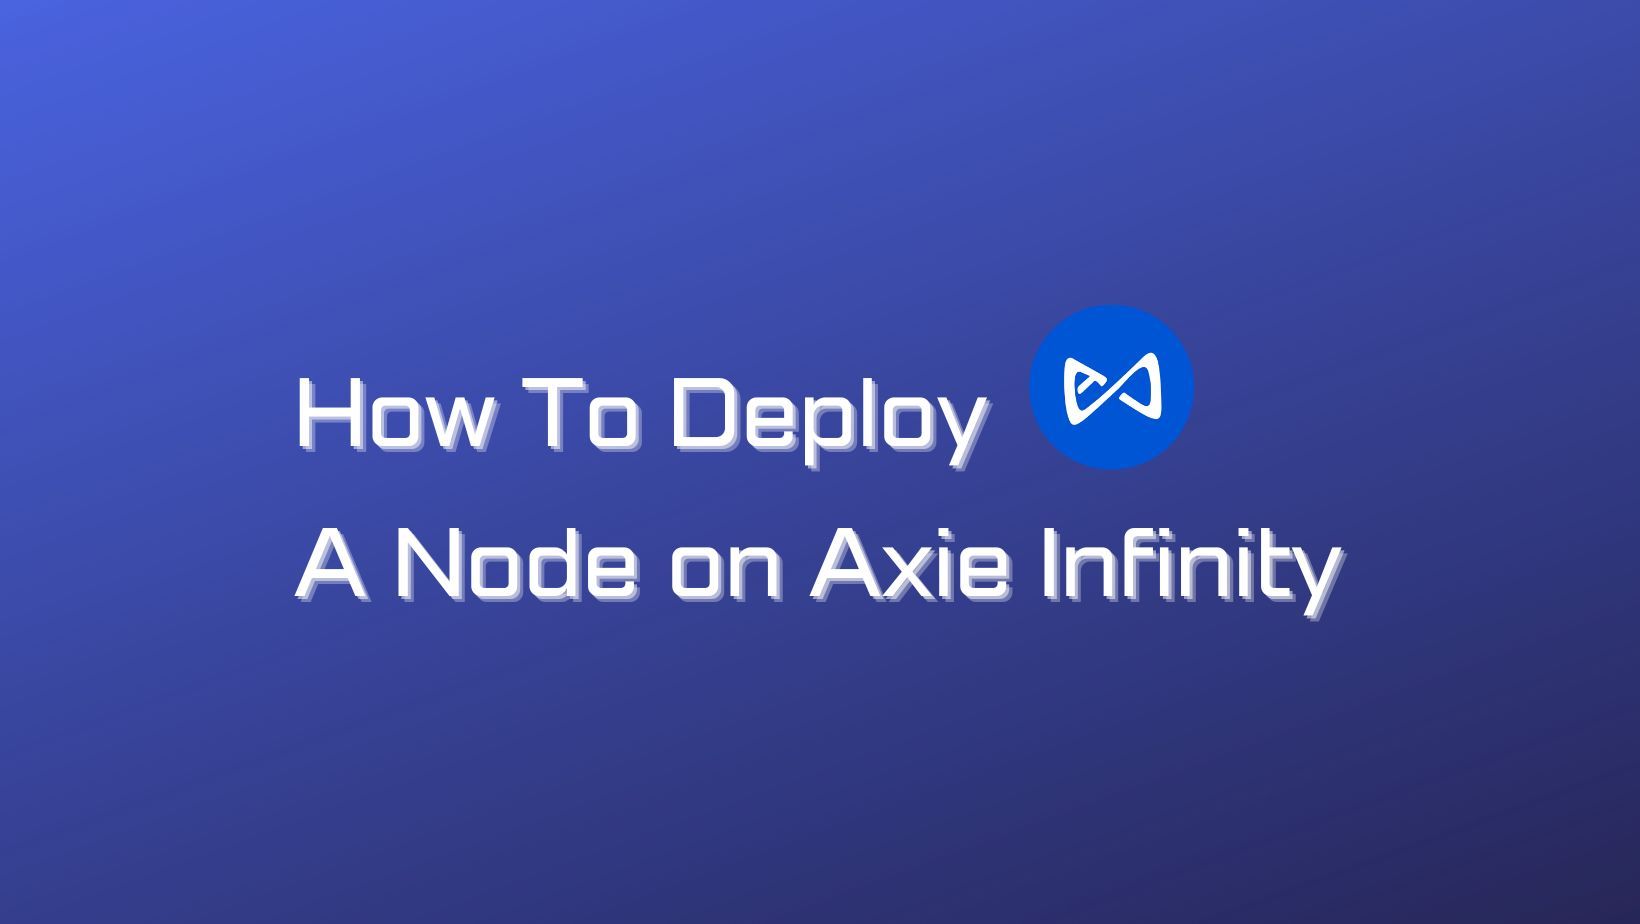 How to Deploy a Node on Axie Infinity